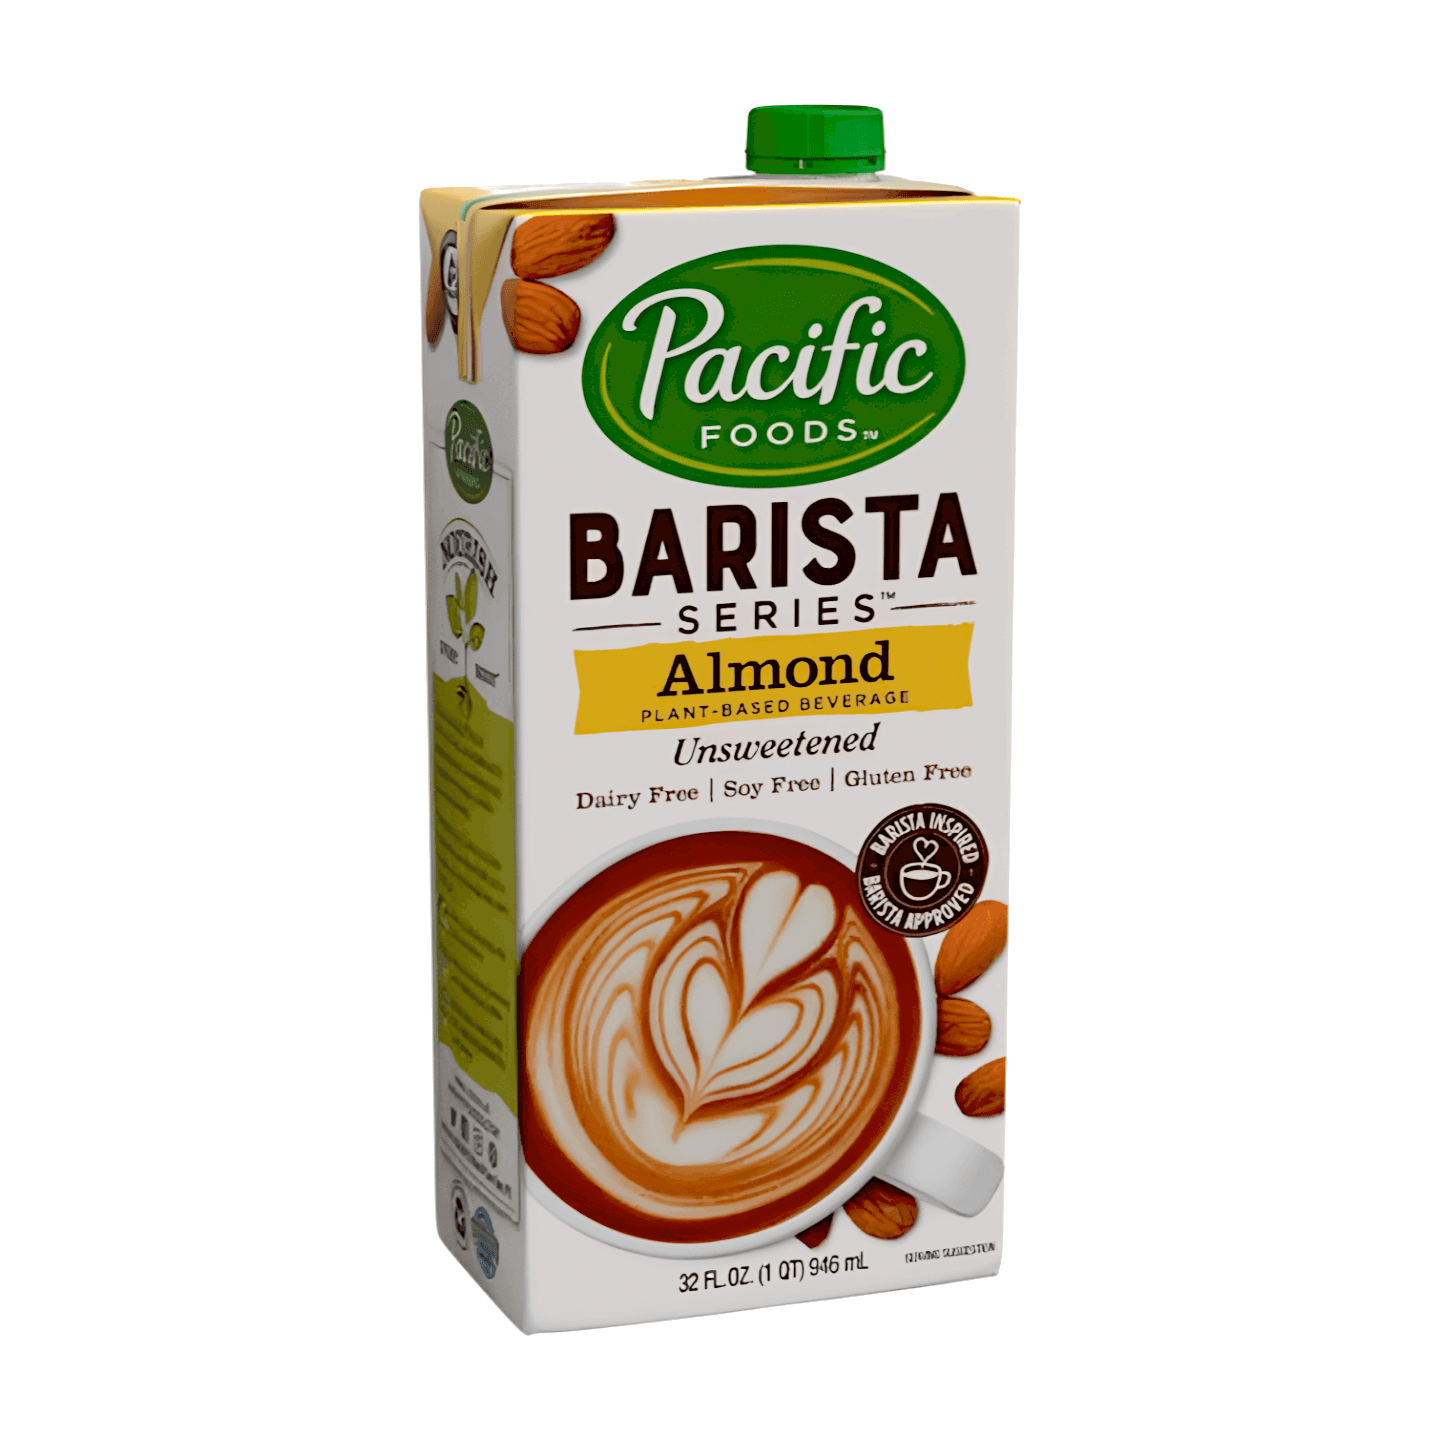 Pacific Foods Barista Series Almond Unsweetened